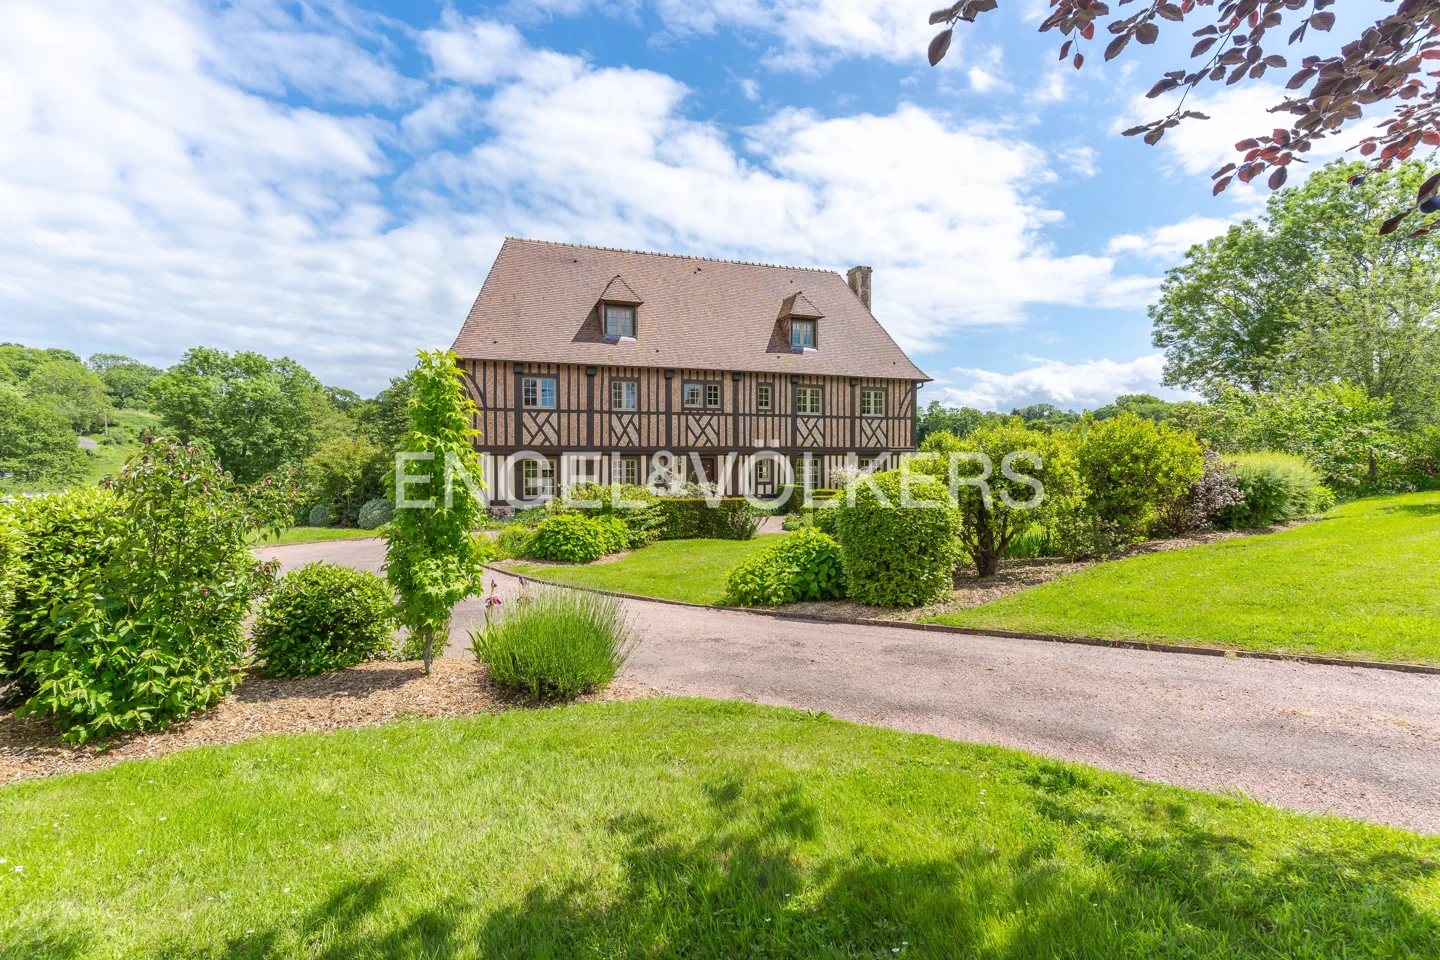 Authentic 226 sqm property  - Near Deauville